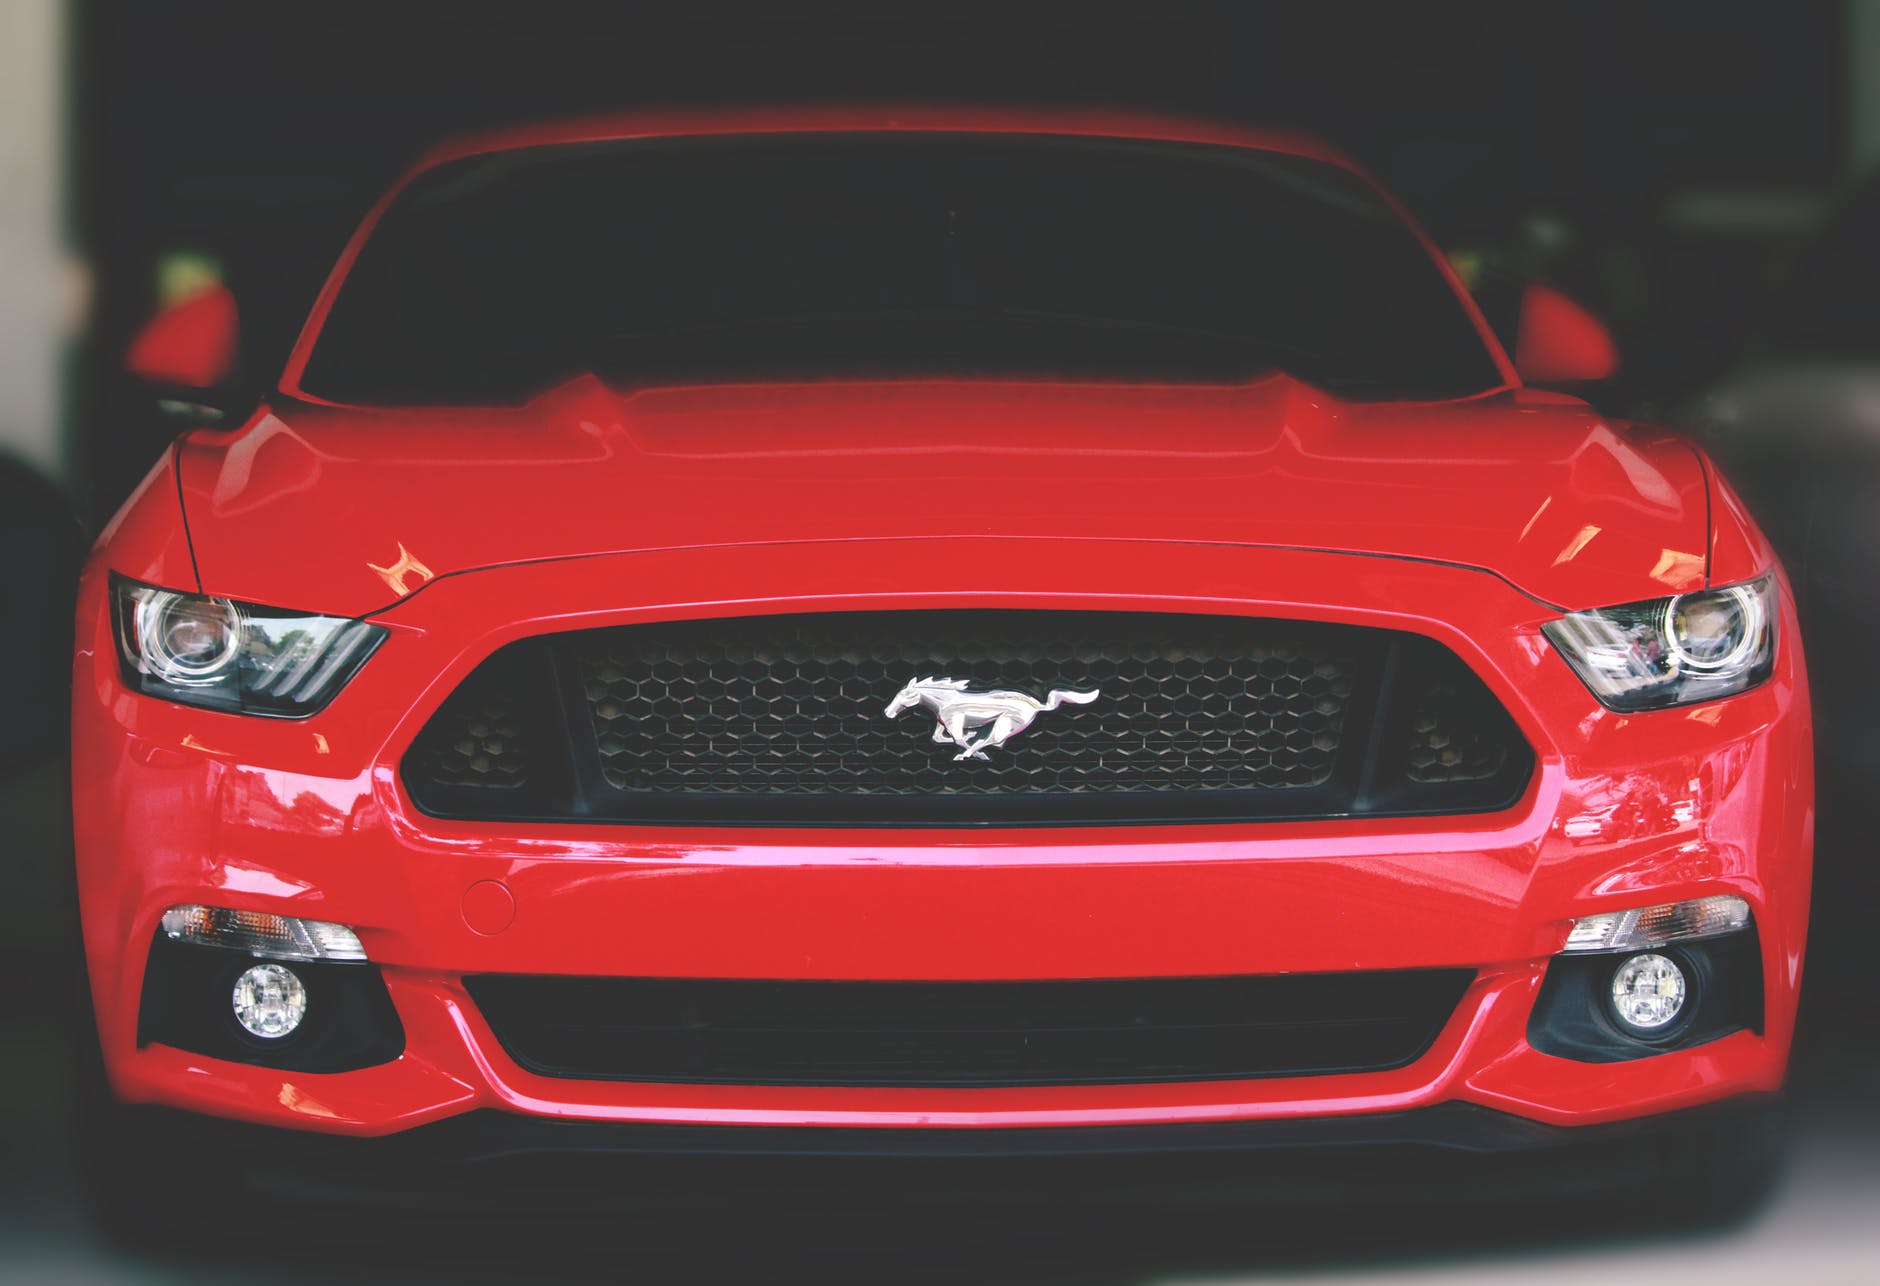 Front view of red Ford Mustang car showing the prancing Mustang horse on the front grill.